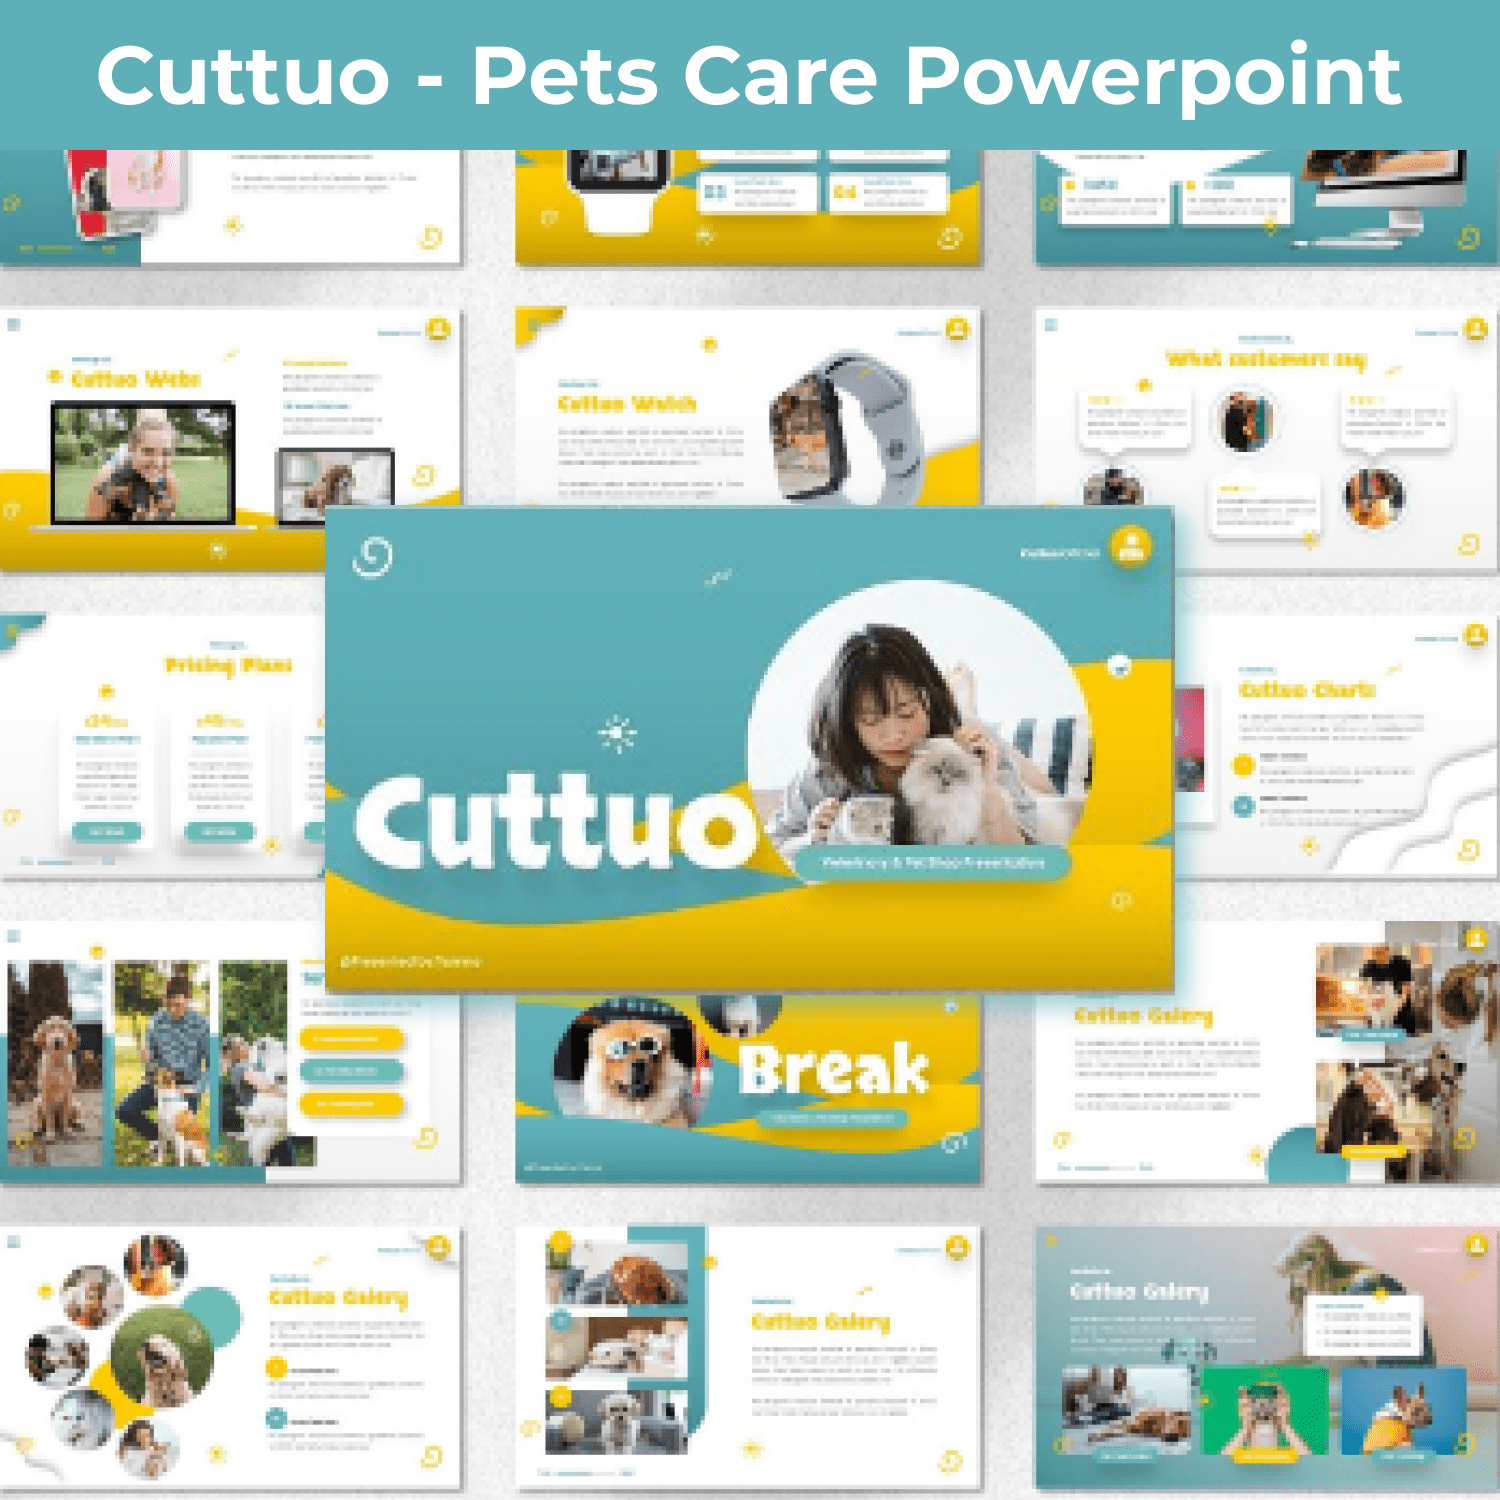 Cuttuo - Pets Care Powerpoint main cover.